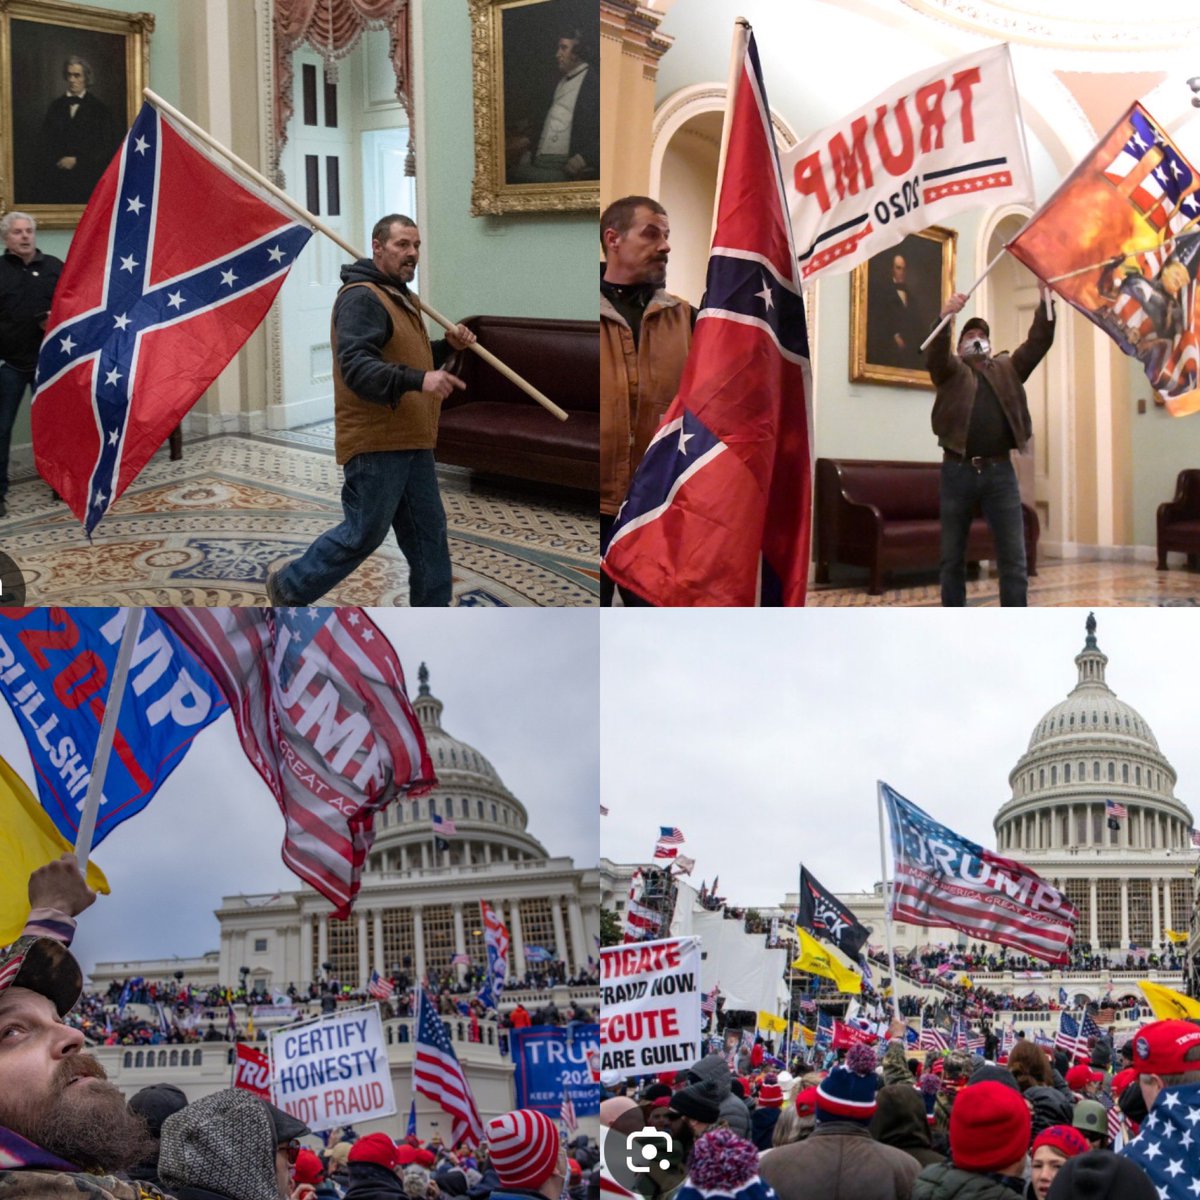 @RepClayHiggins MAGA’s “ flying other flags in the capitol is a disgrace” Also MAGA’s